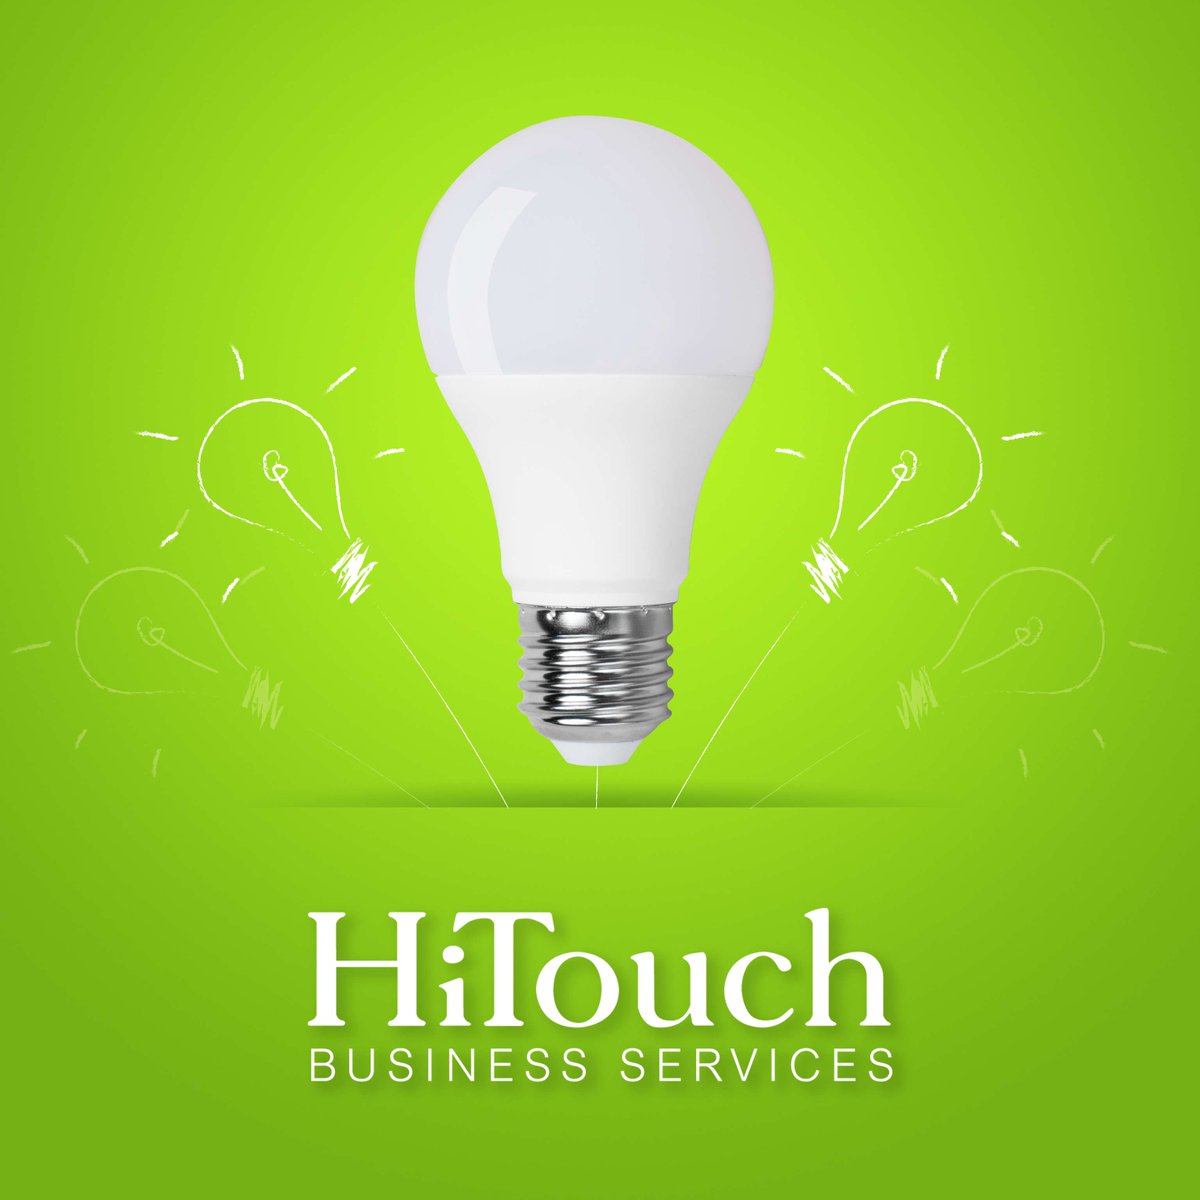 Ready for your organization to make a difference in sustainability? HiTouch has the products and solutions you need to make your facilities more eco-friendly! ow.ly/sL5K50RekE2

#facilitiesmanagement #facilities #facility #janitorial #ecofriendly #sustainability